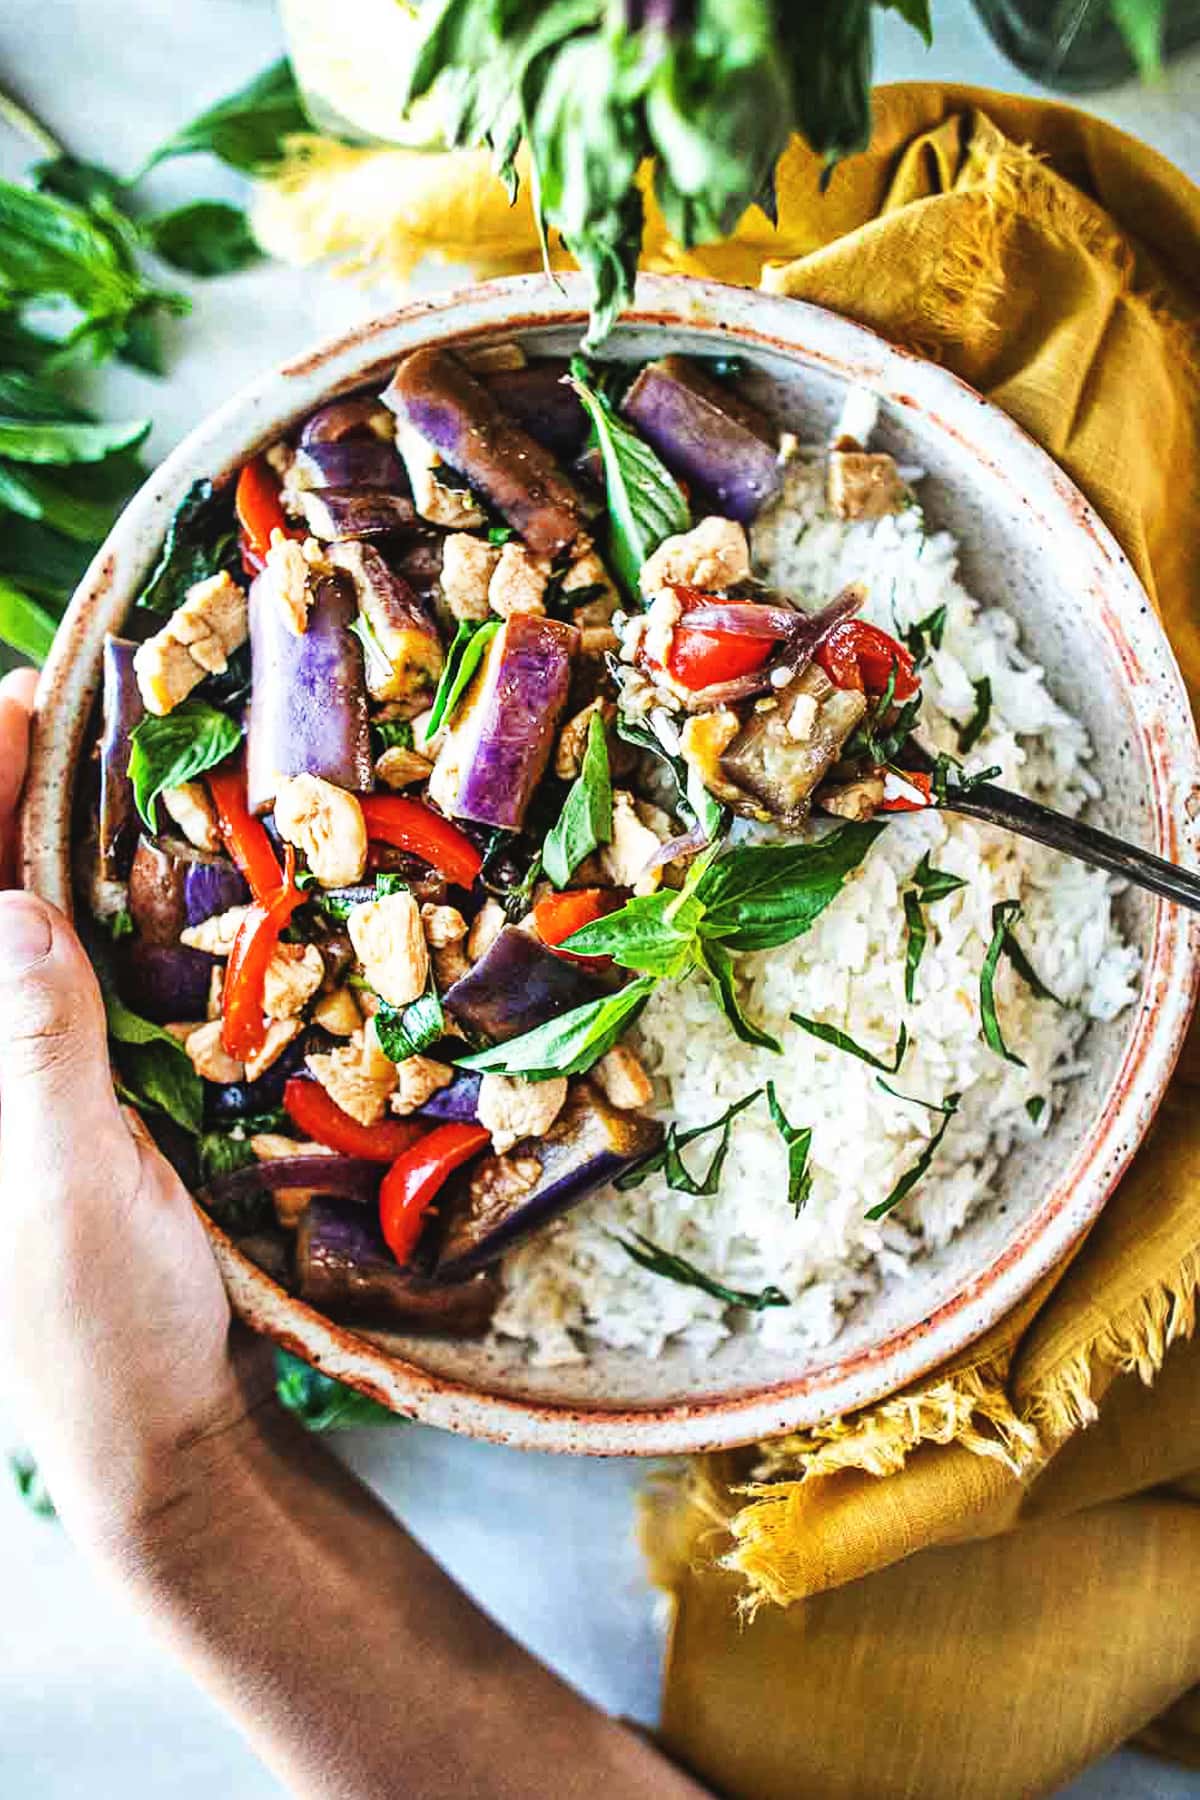 This Thai Eggplant Stir Fry is a delicious healthy meal featuring succulent eggplant, your choice of protein, fresh veggies in a flavorful Thai stir-fry sauce,  finished with aromatic Thai basil.